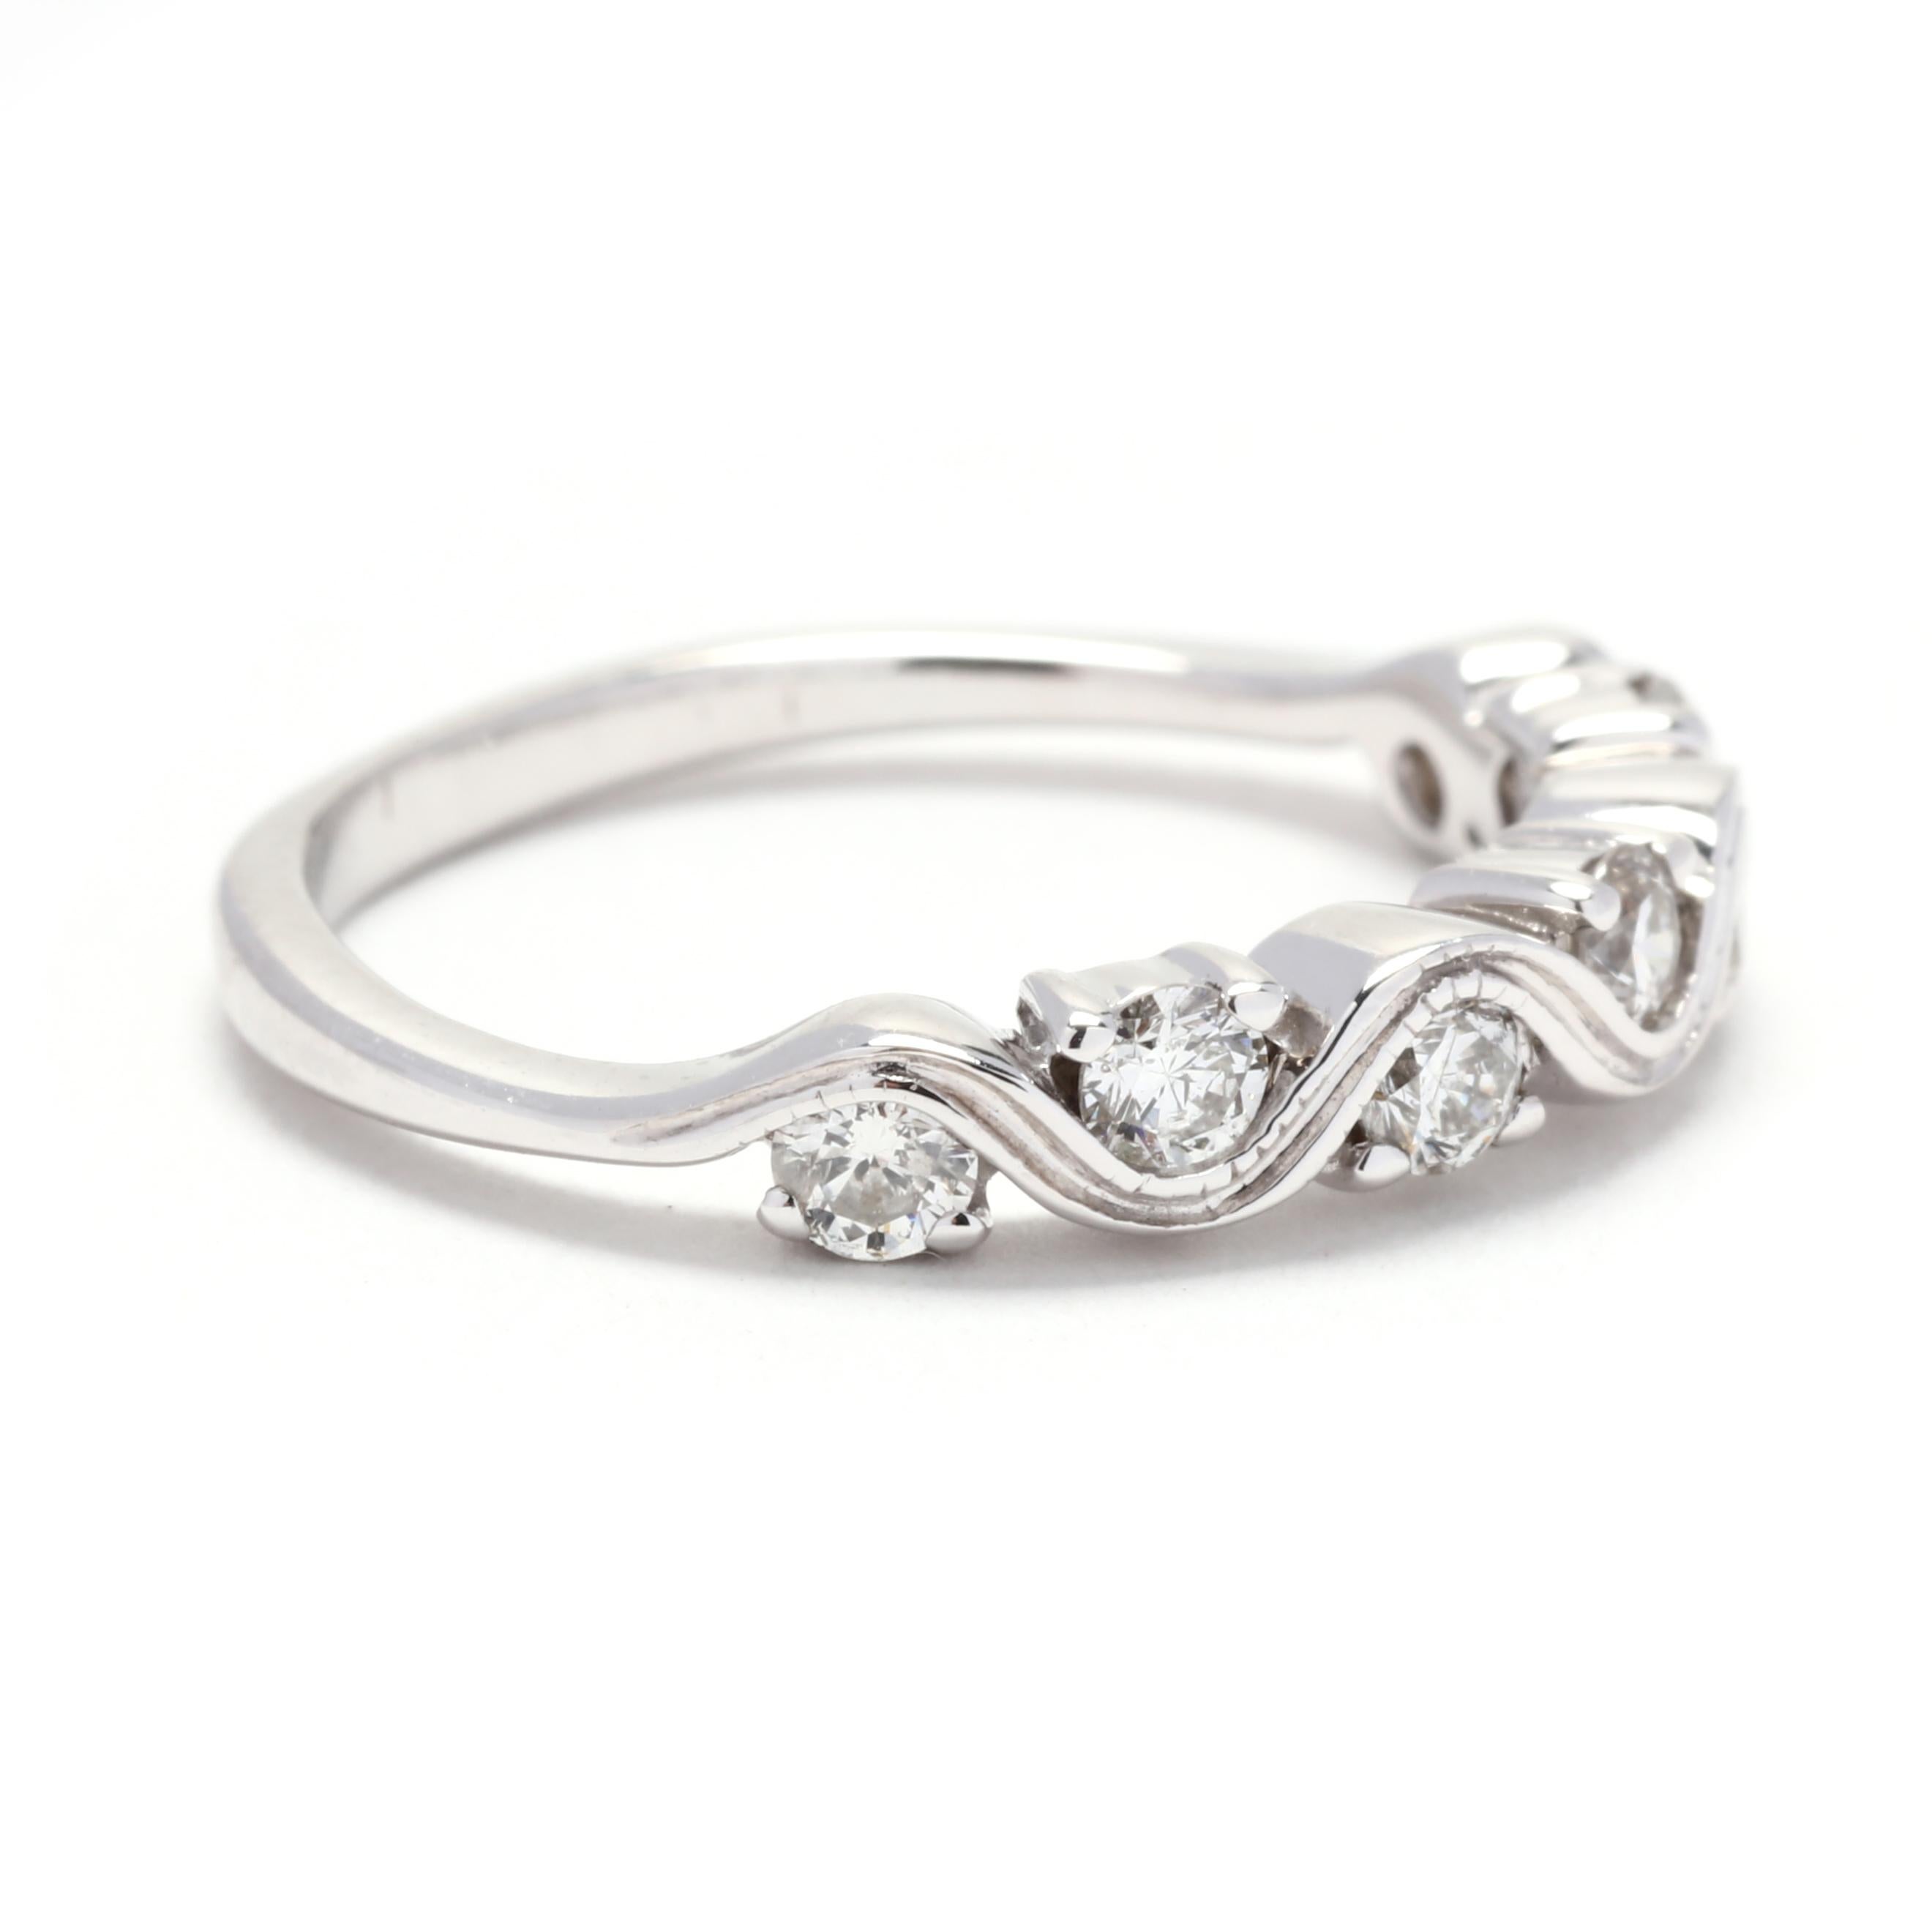 This stunning diamond swirl wedding band is the perfect addition to your bridal set. Crafted in 14K white gold, this ring features a delicate swirl design adorned with dazzling round diamonds. The total carat weight of this band is 0.45ctw, adding a